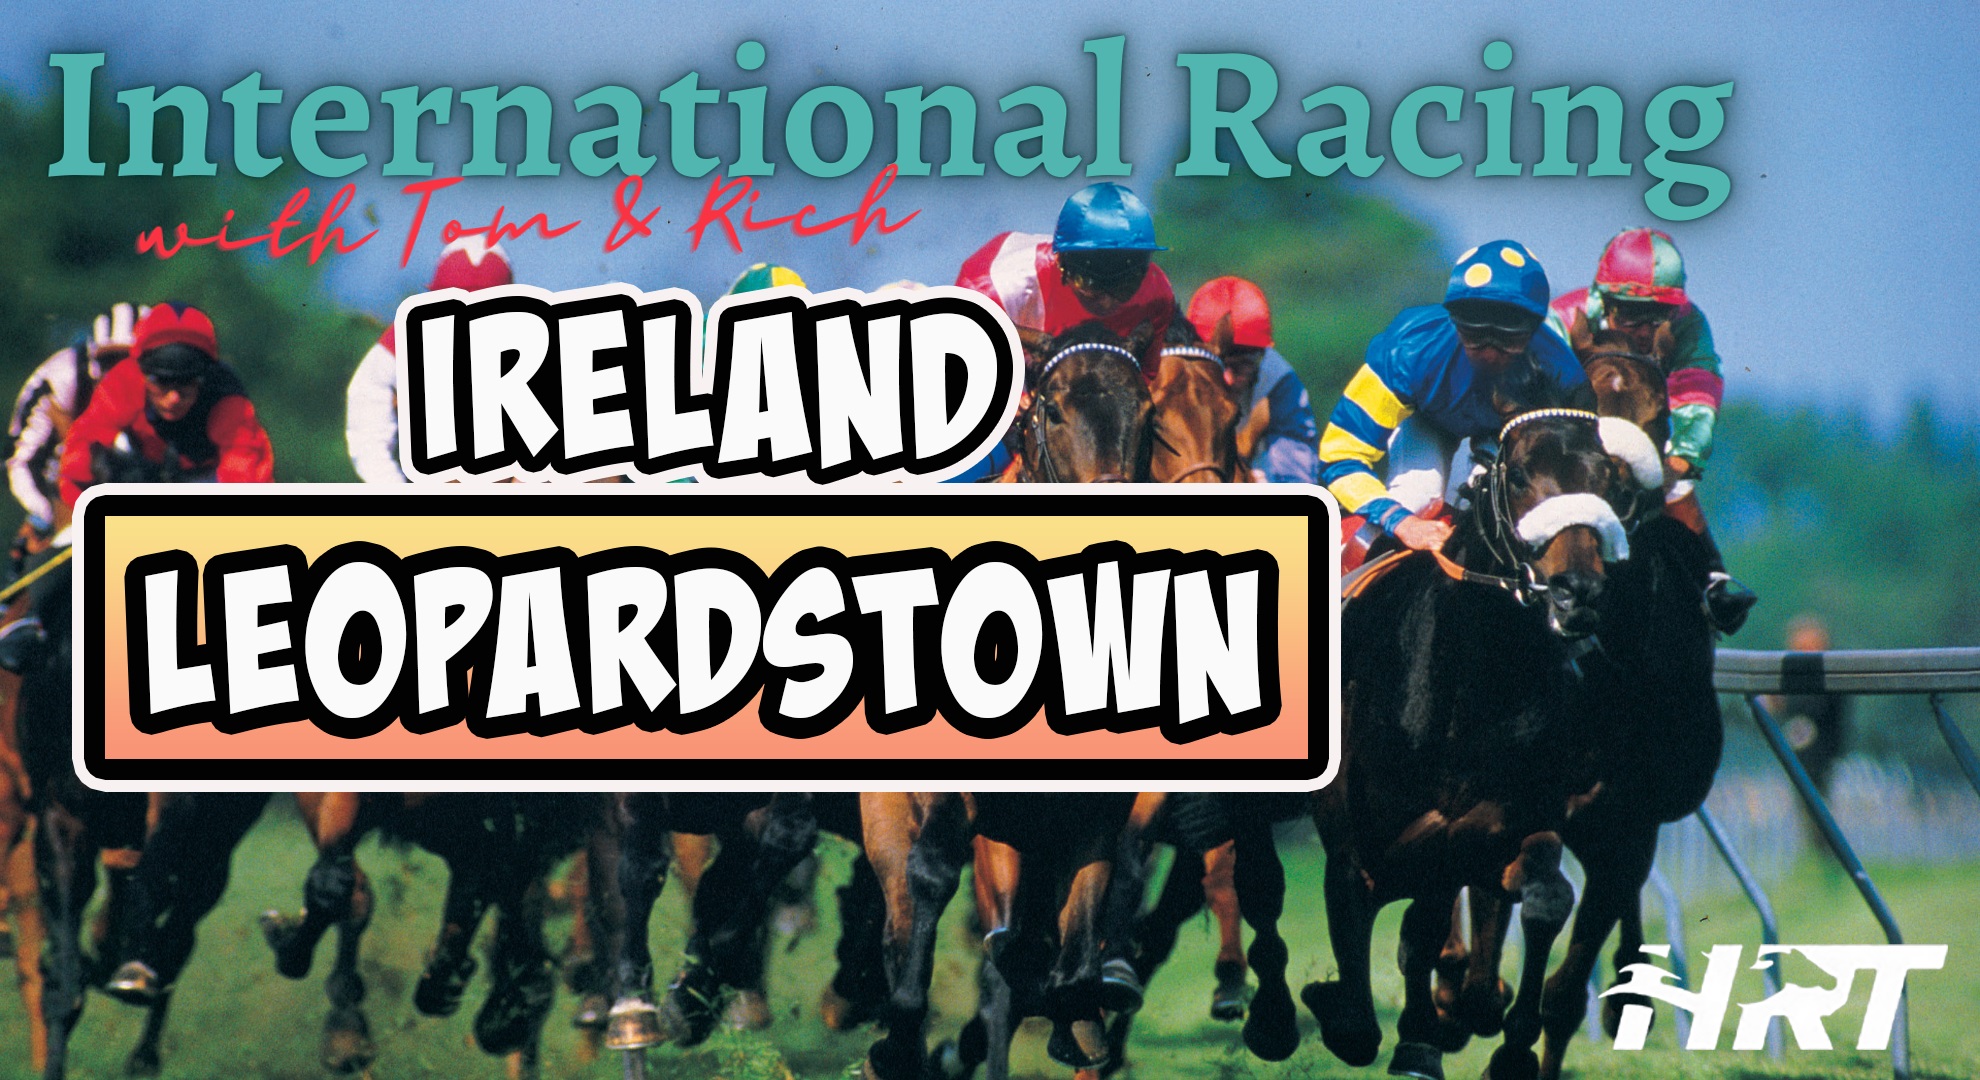 Leopardstown Horse Racing Picks and Commentary